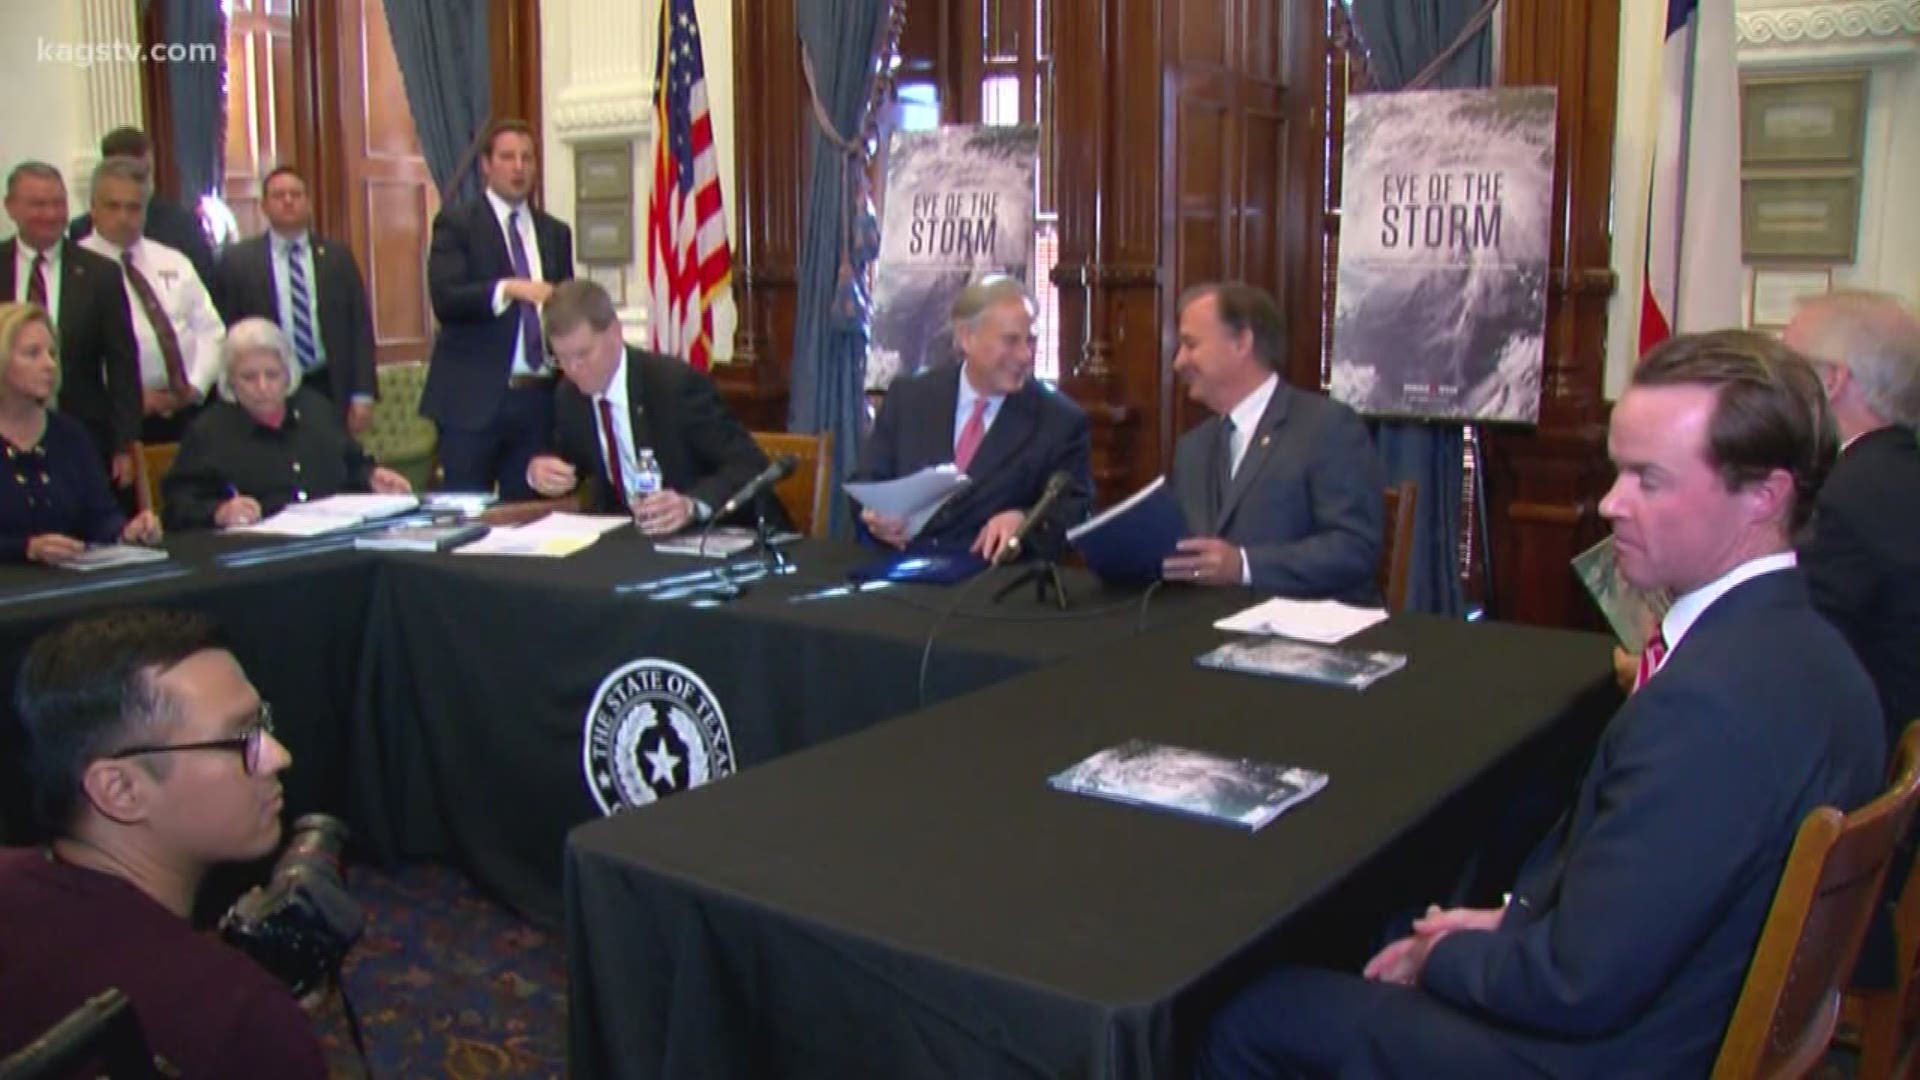 Governor Abbott unveiled recommendations today, spearheaded by A&M chancellor and state hurricane recovery Czar John Sharp, created after Harvey devastated our state more than a year ago.